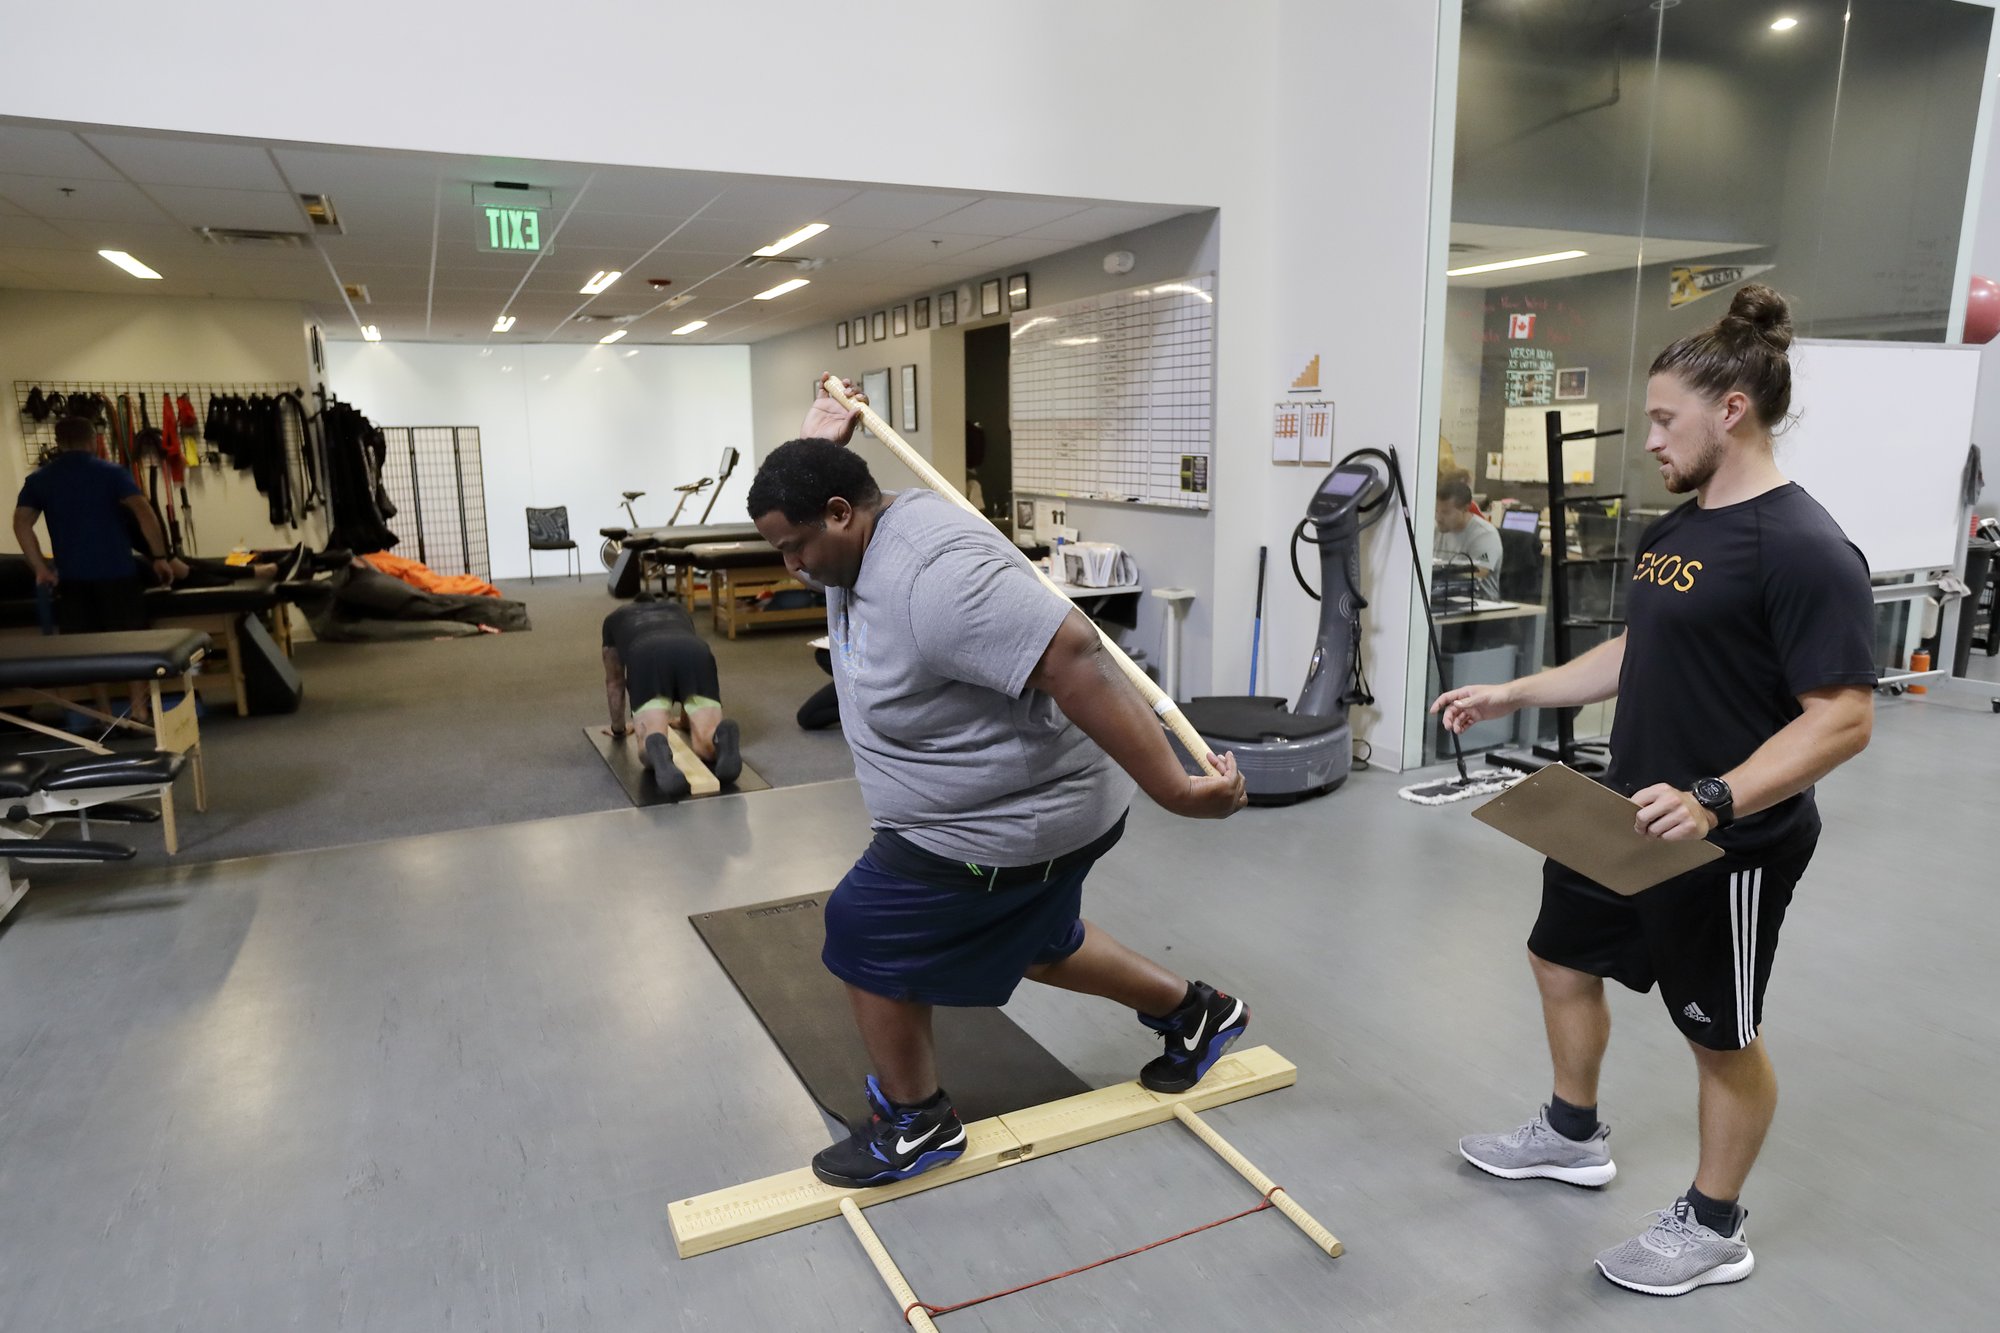 Breakfast Club helps former NFL players get healthy together